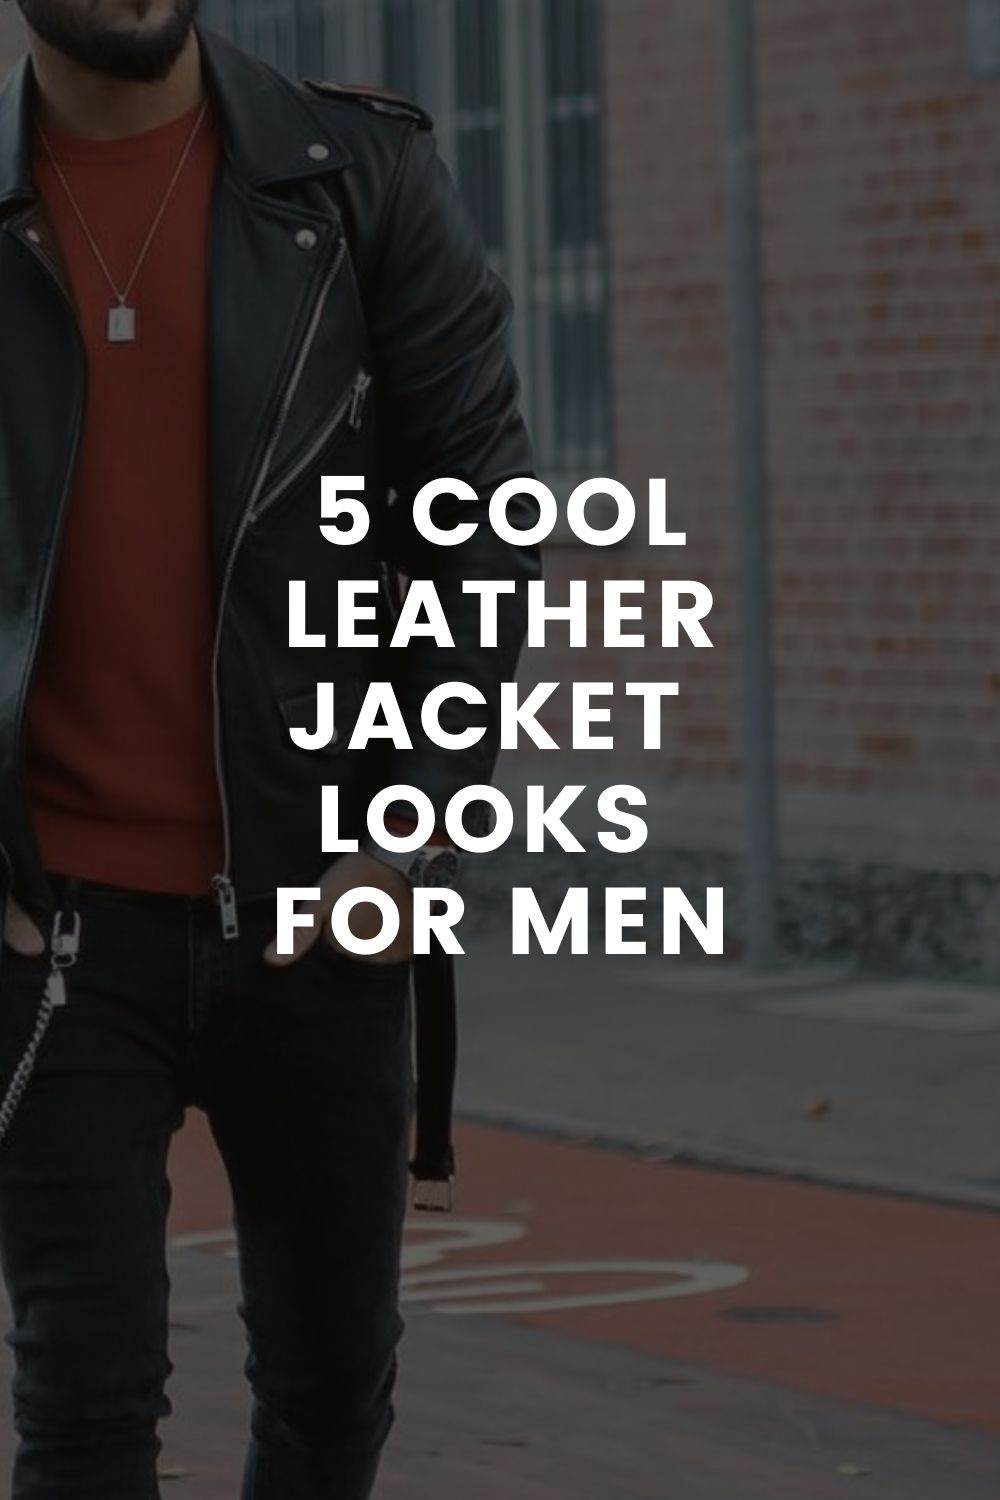 Leather jacket looks for men